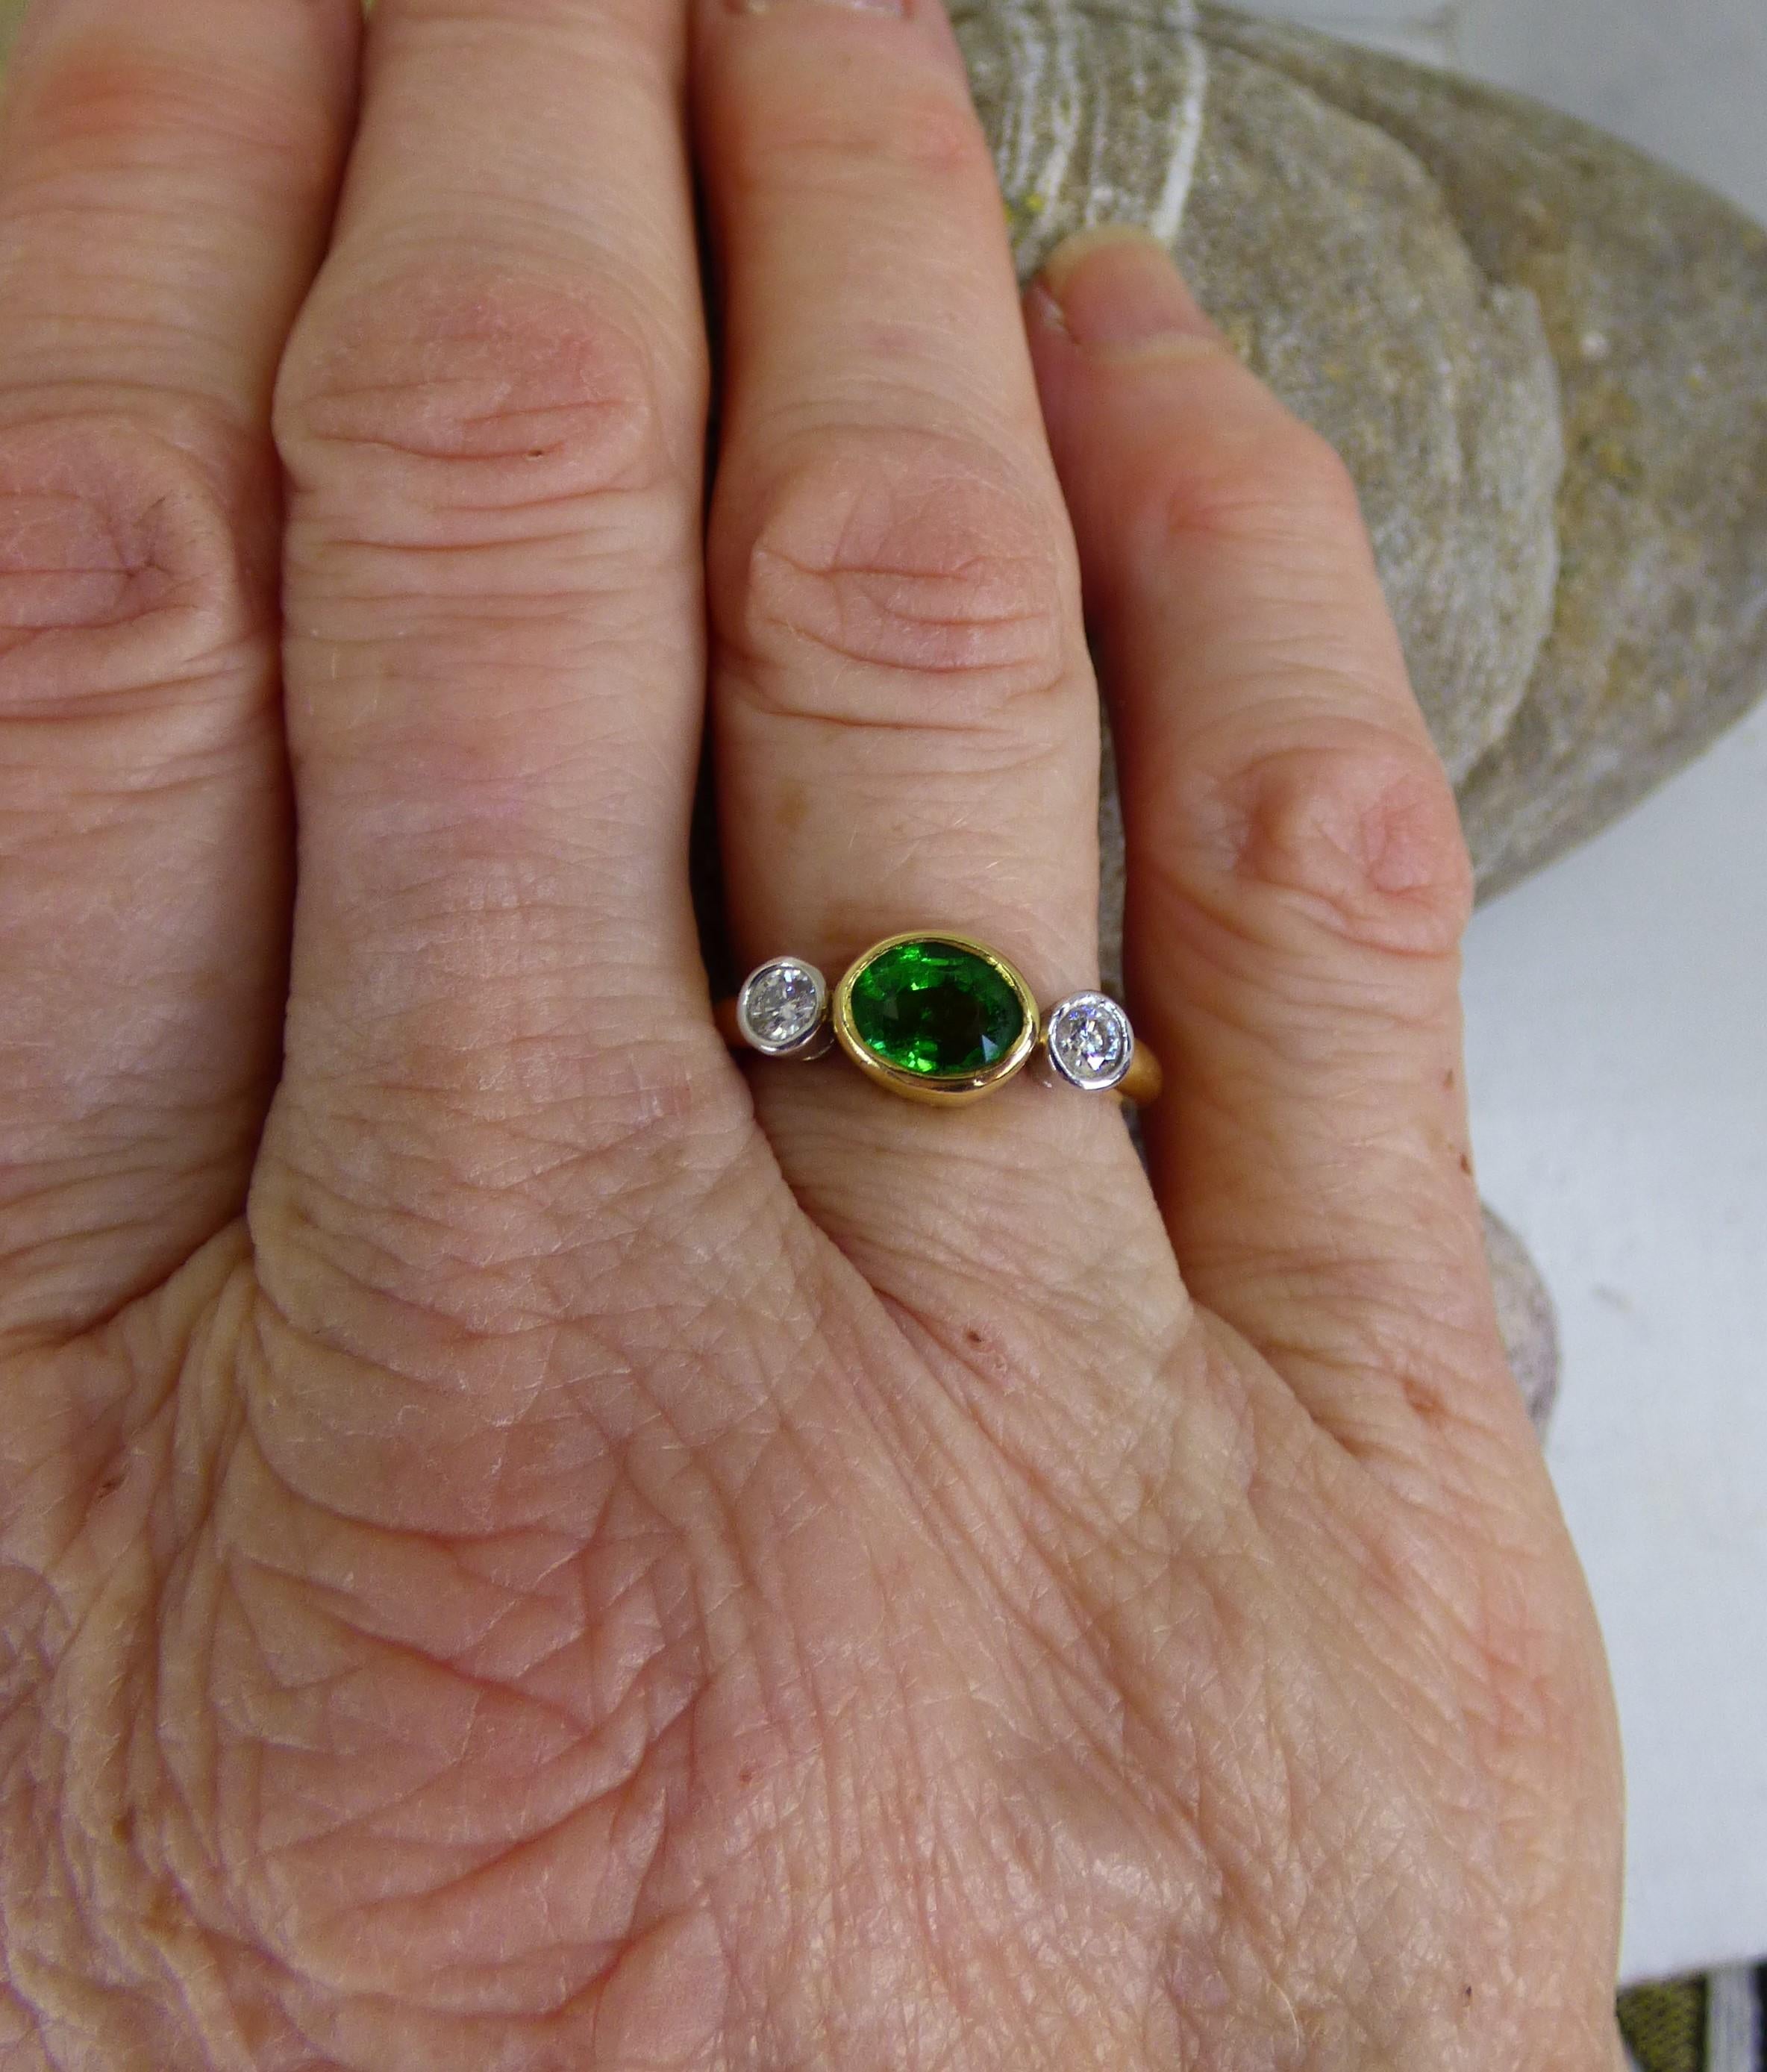 A colourful 7X5mm Tsavorite Garnet weighing 1.42ct is set between two Diamonds with a total Diamond weight of .18ct.  The ring is handmade in 18K yellow gold with the Diamonds set in 18K white gold. The ring is hallmarked by the Dublin Assay Office.
